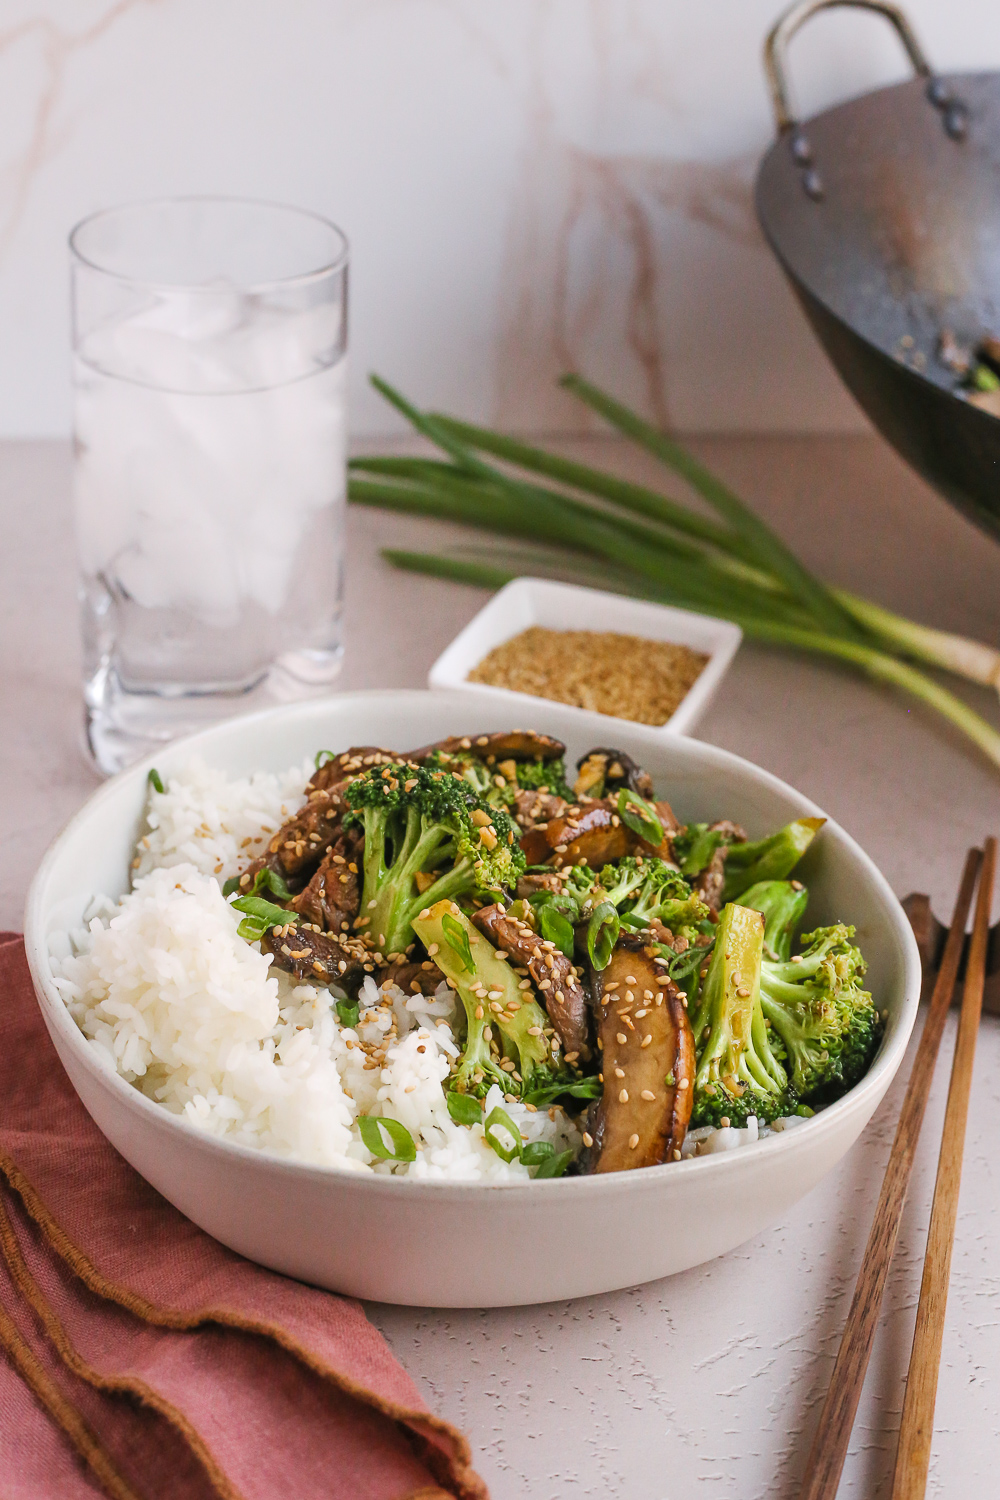 Beef and Broccoli with Mushrooms served in a bowl with white rice, garnished with green onions and sesame seeds, served with chopsticks, a glass of water, and a light pink napkin in a kitchen scene